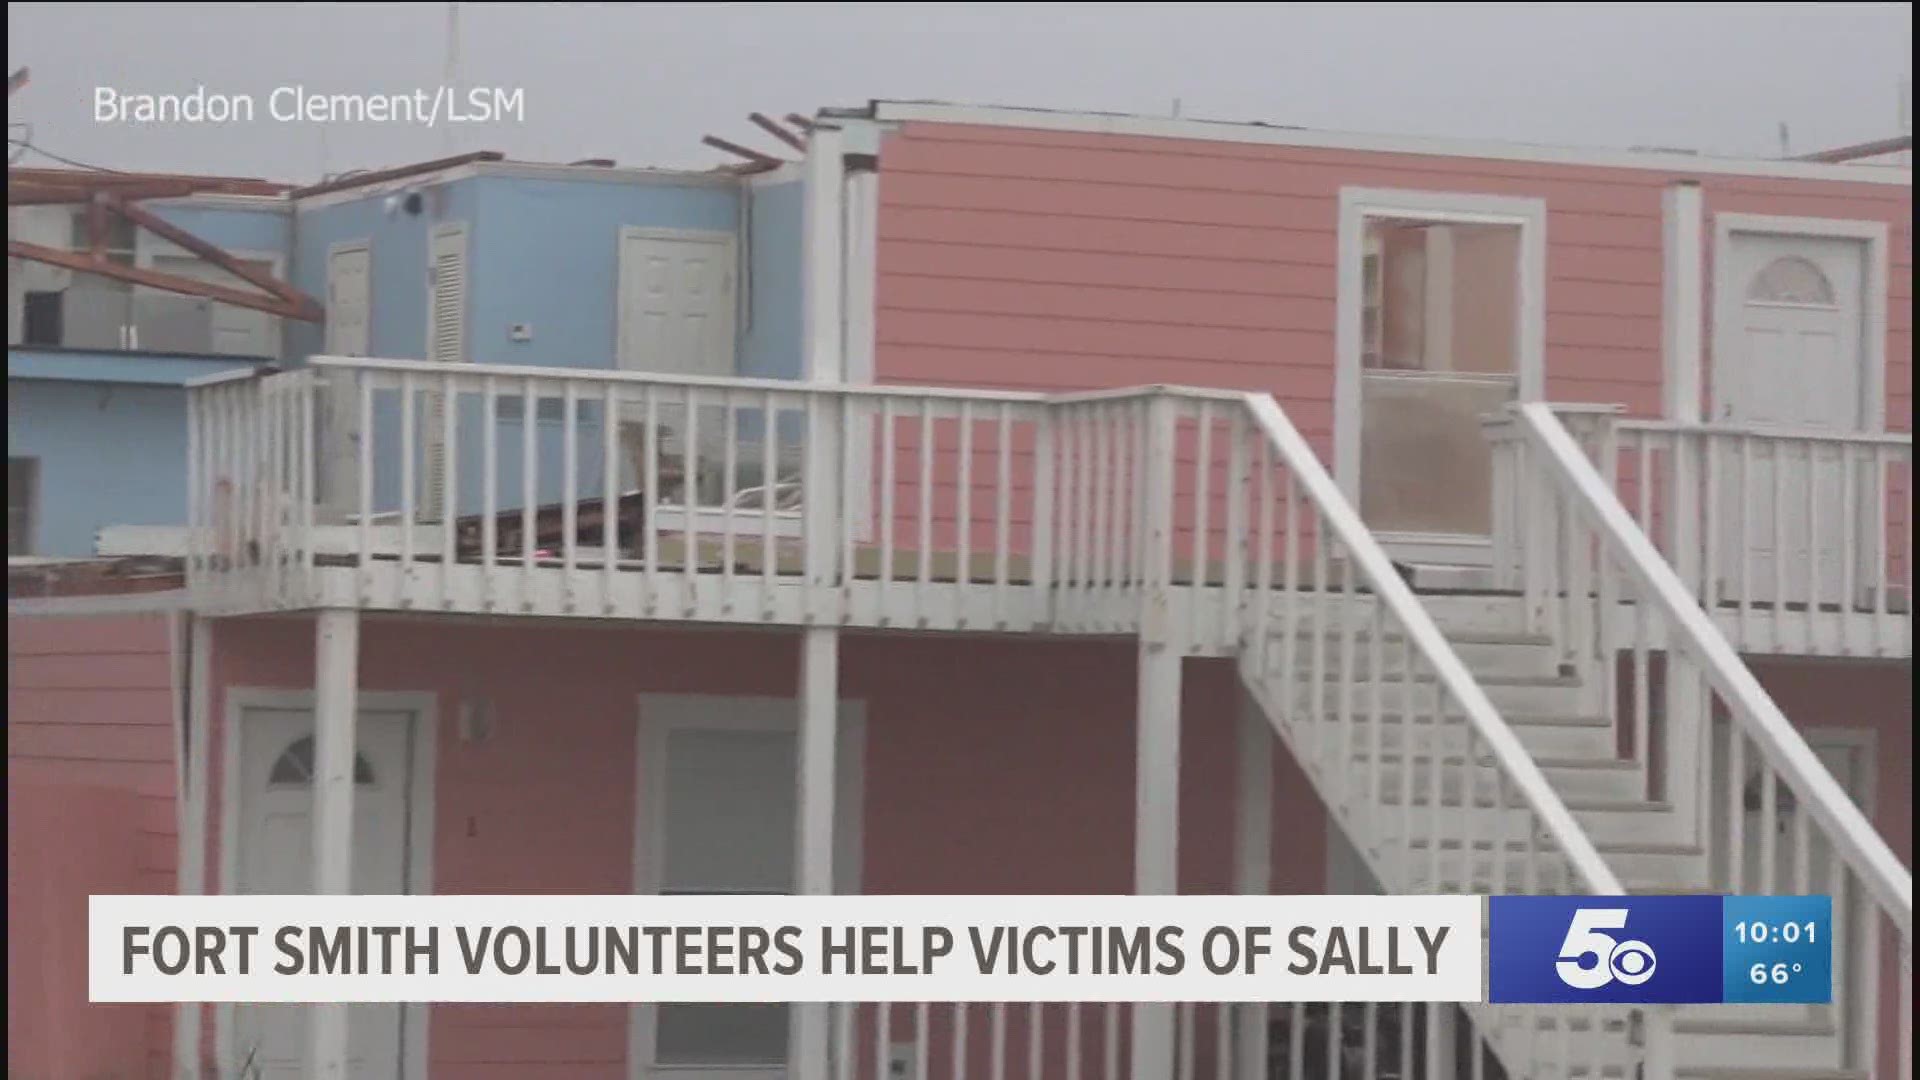 Volunteers just arrived along the Gulf Coast to deliver much-needed help after Hurricane Salley swept through the area. https://bit.ly/2ZIAs07